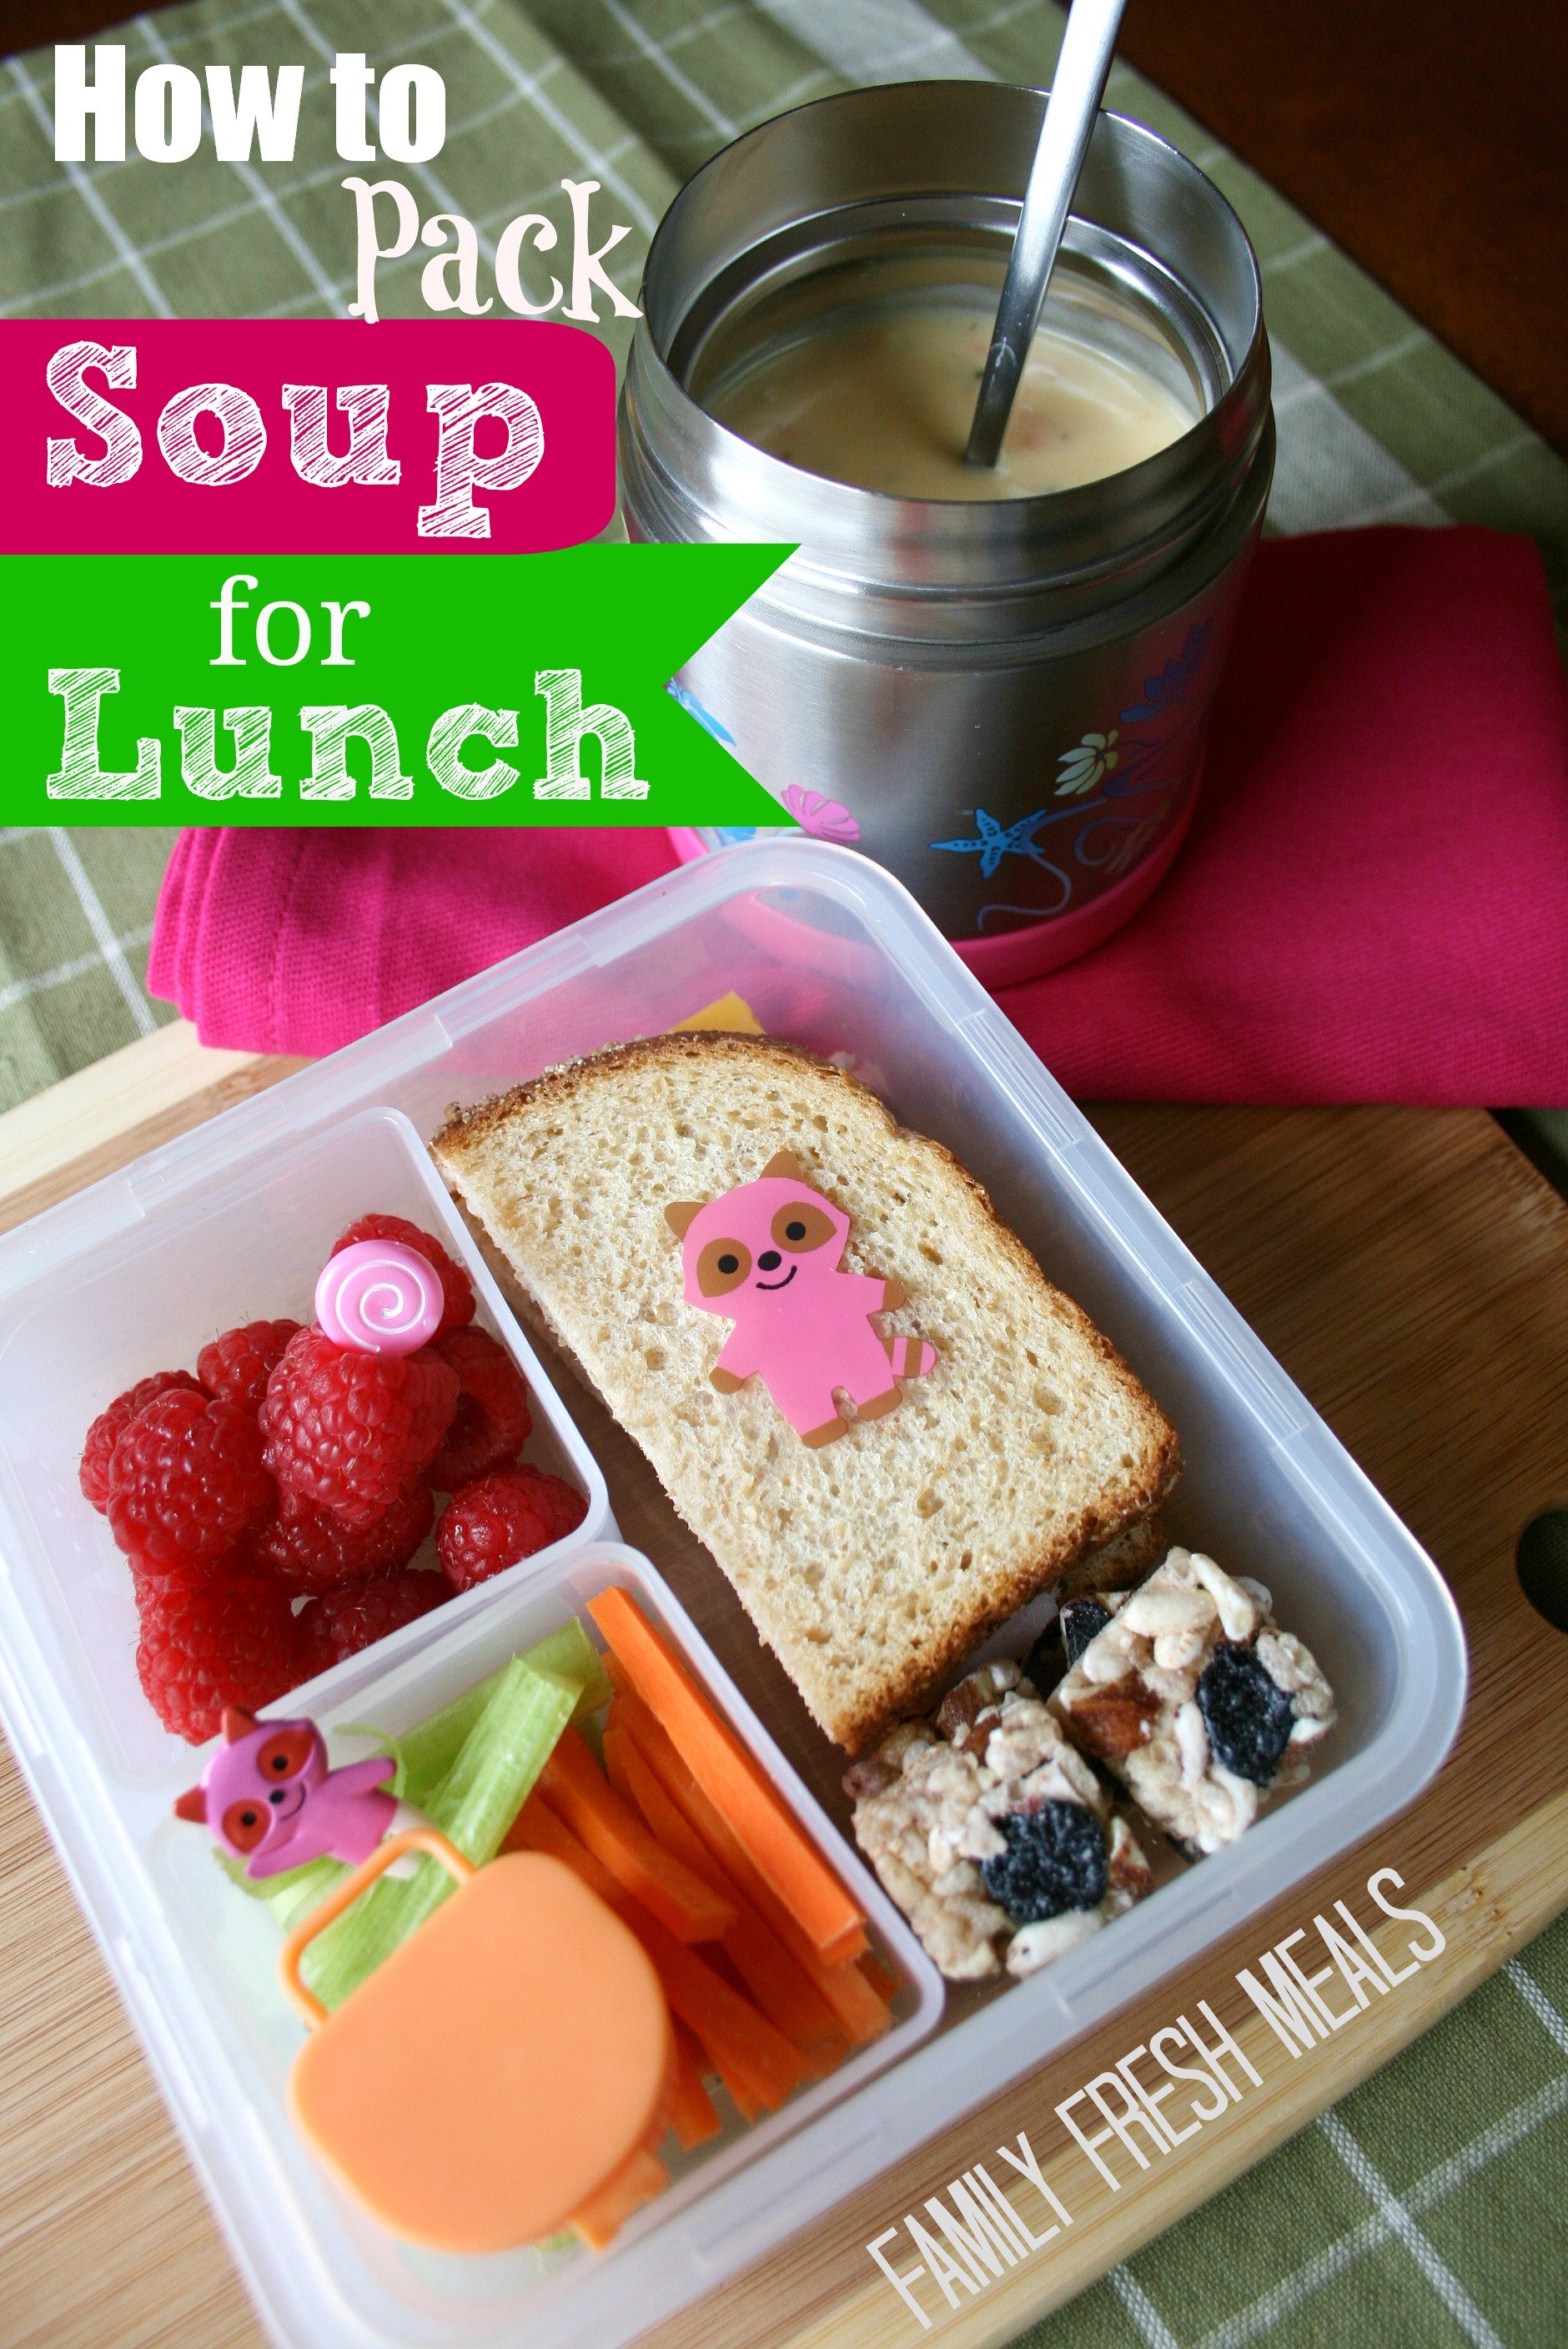 https://www.familyfreshmeals.com/wp-content/uploads/2012/12/how-to-pack-soup-for-lunch.jpg